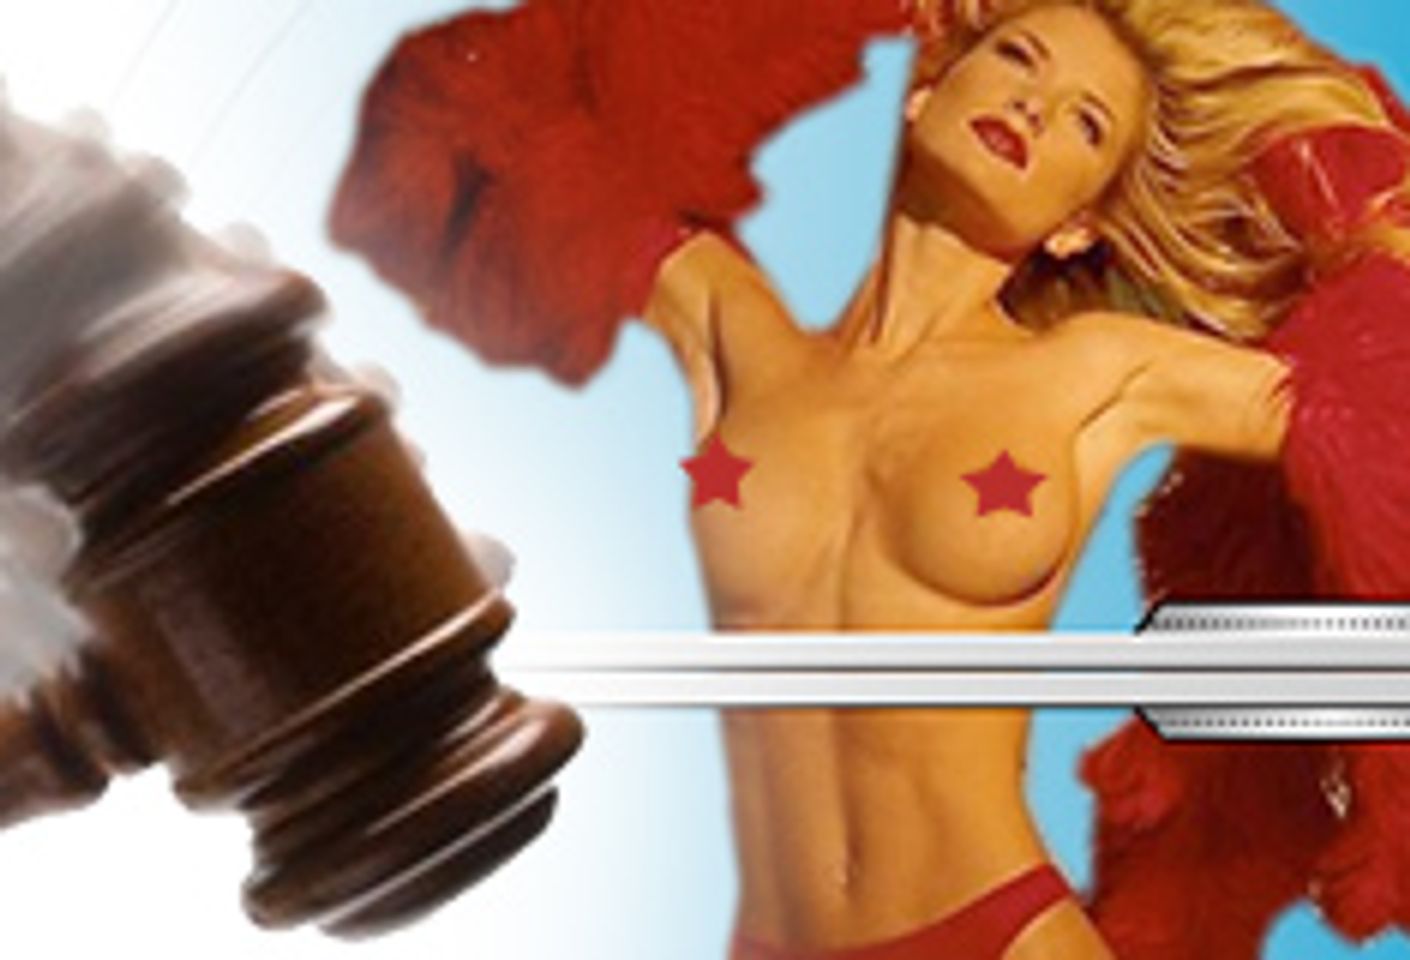 Perfect 10 Sues Microsoft for Copyright Infringement